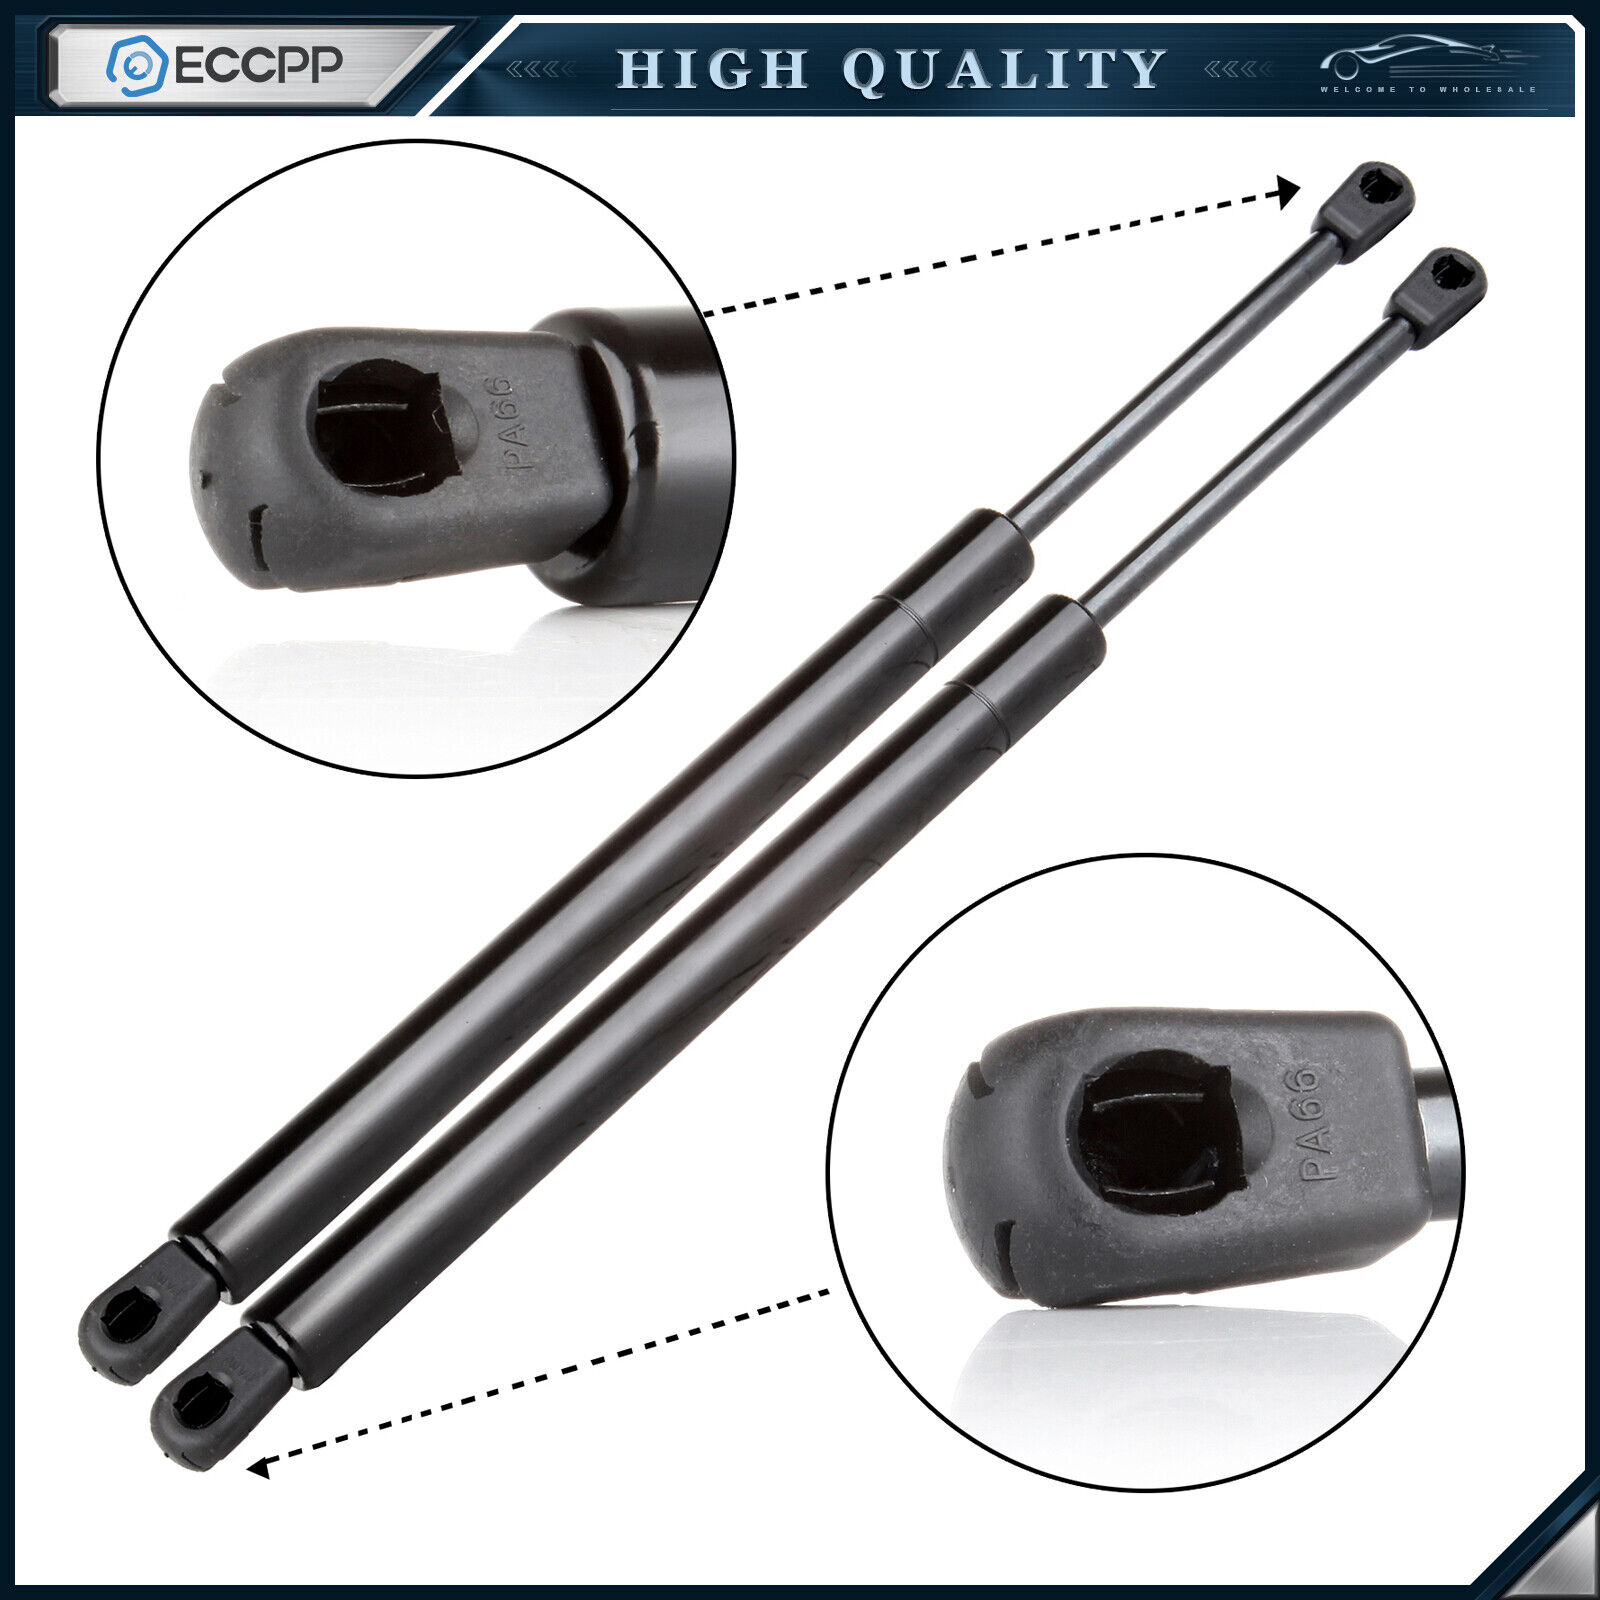 ECCPP 2Rear Liftgate Lift Supports Shocks Struts For 2005-2010 Dodge Magnum 6103